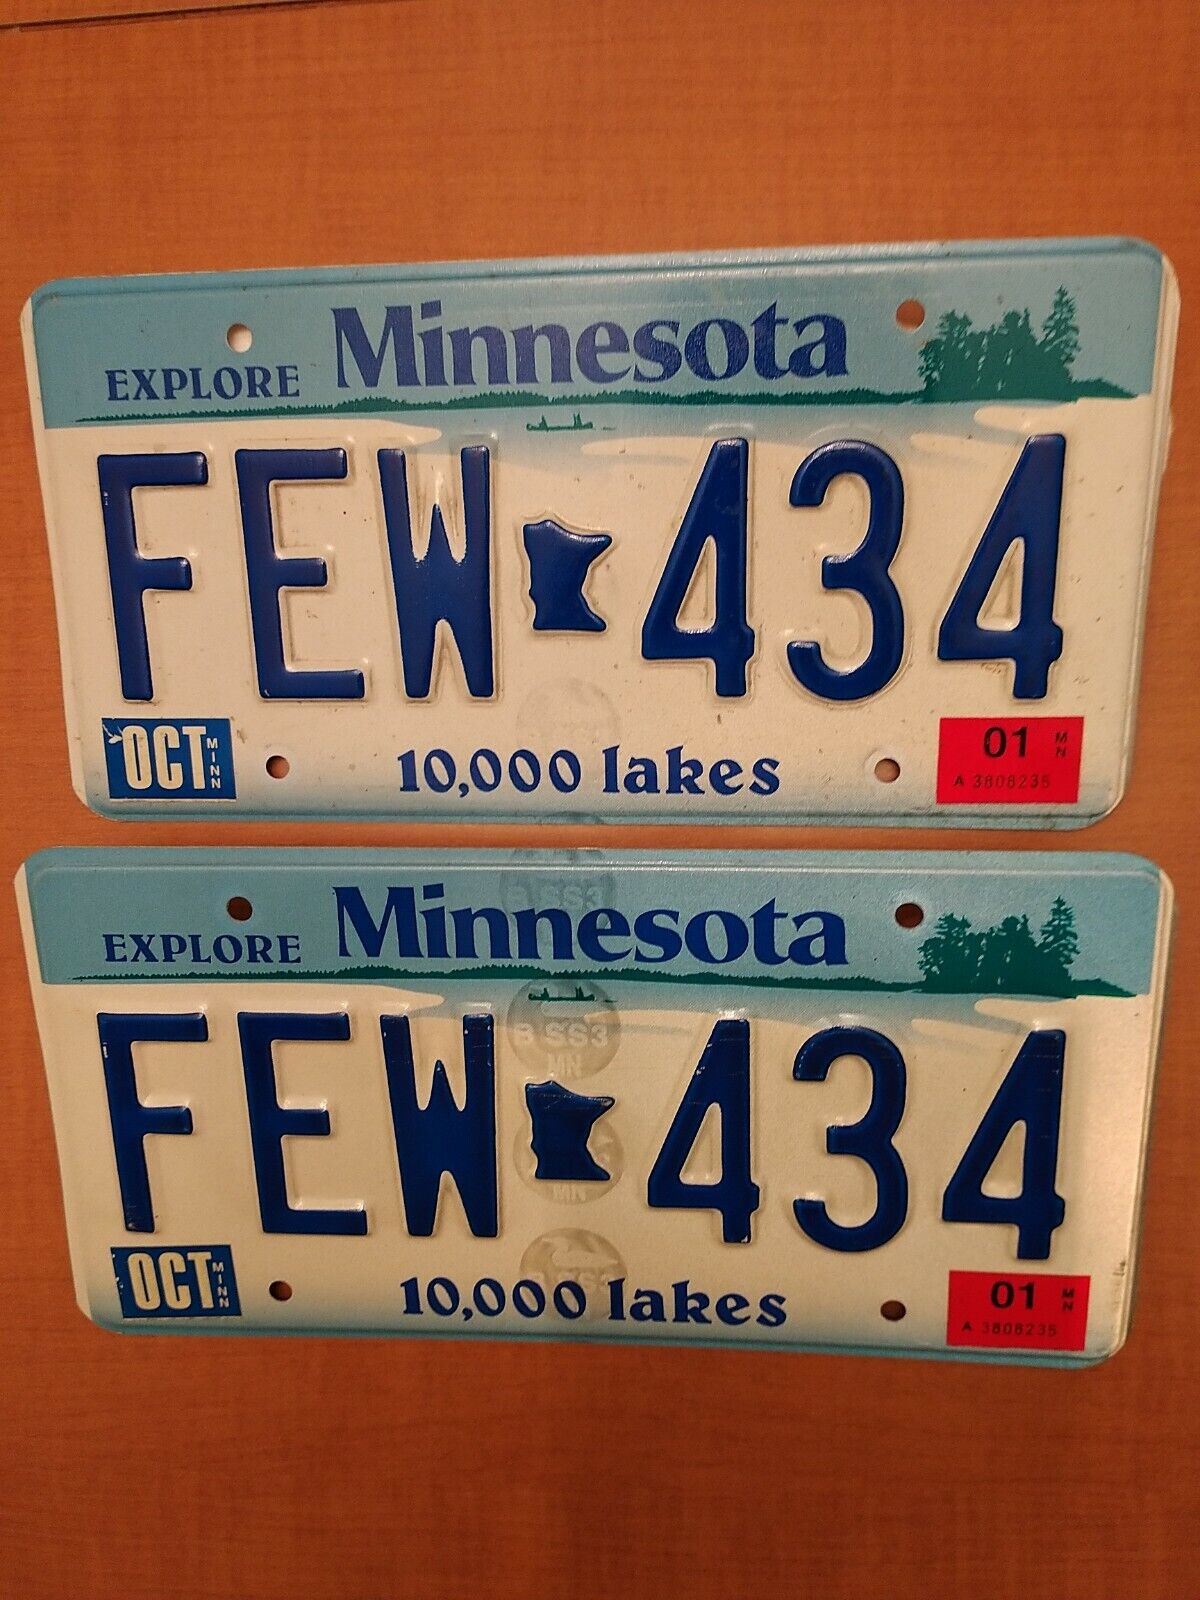 PAIR OF OCT. 2001 MINNESOTA LICENSE PLATES Front & back # FEW--434. Great Shape!